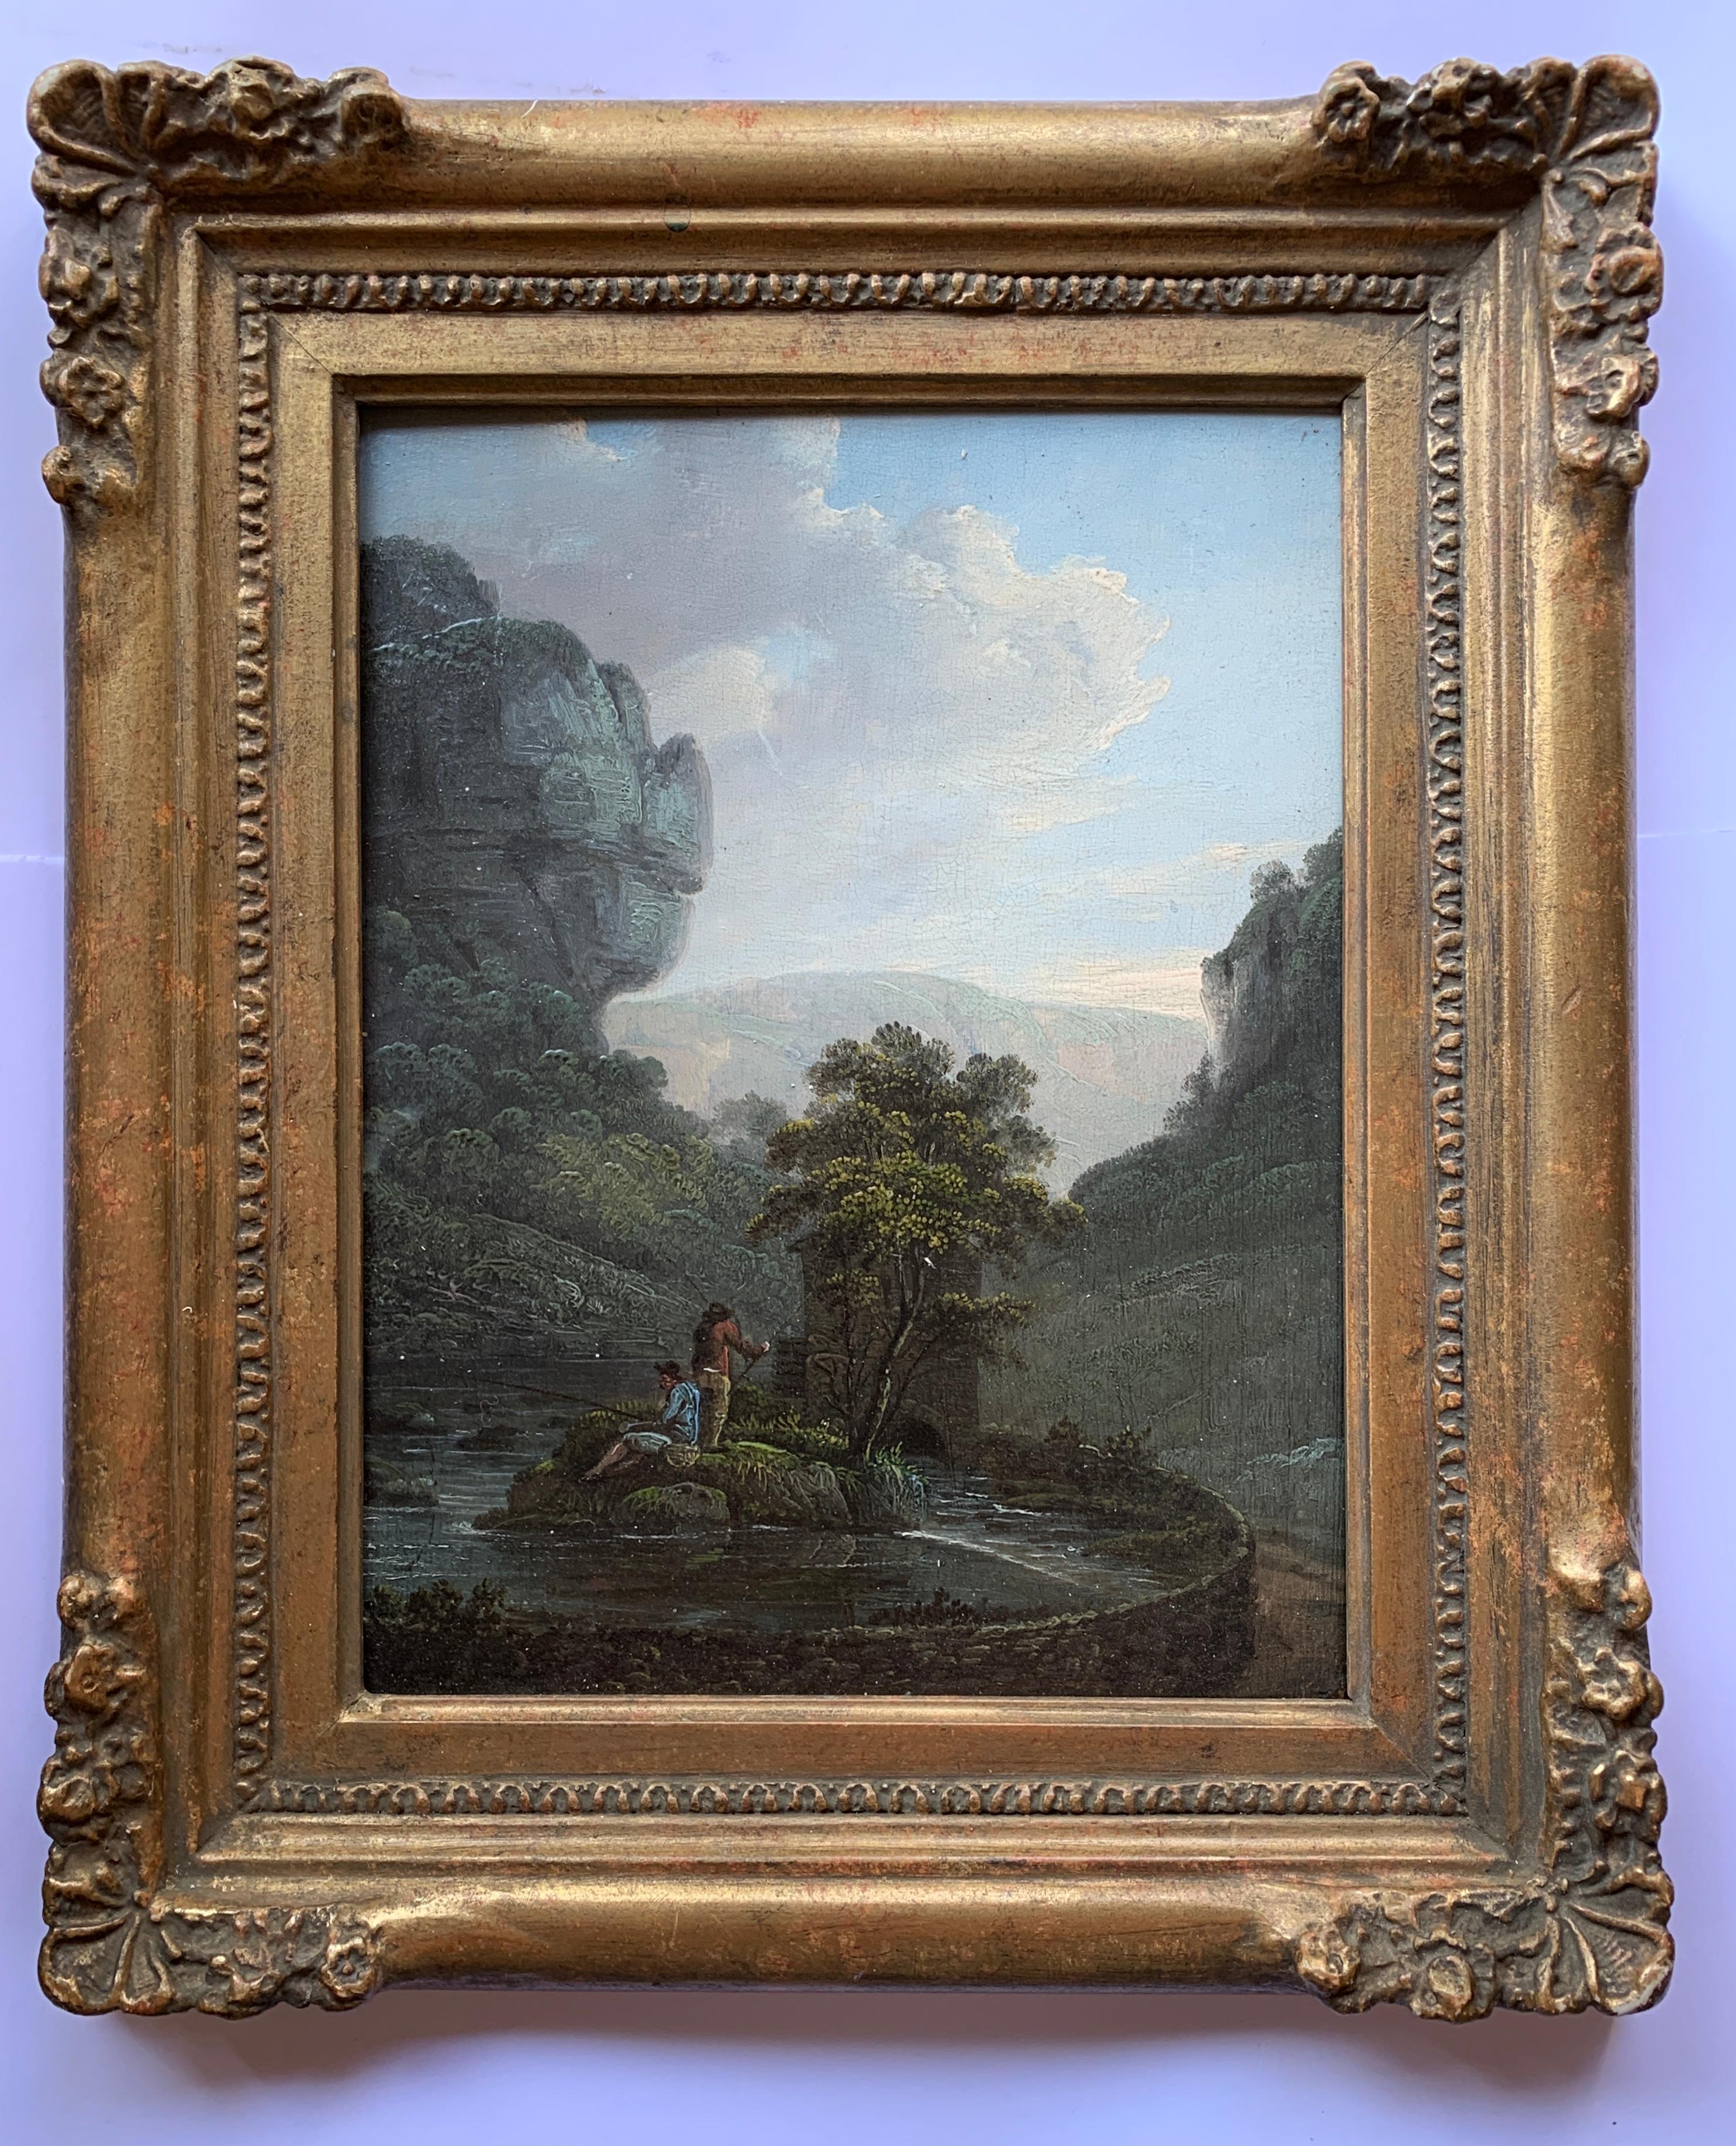 Unknown Figurative Painting - Early 19th century English  River landscape with fishermen